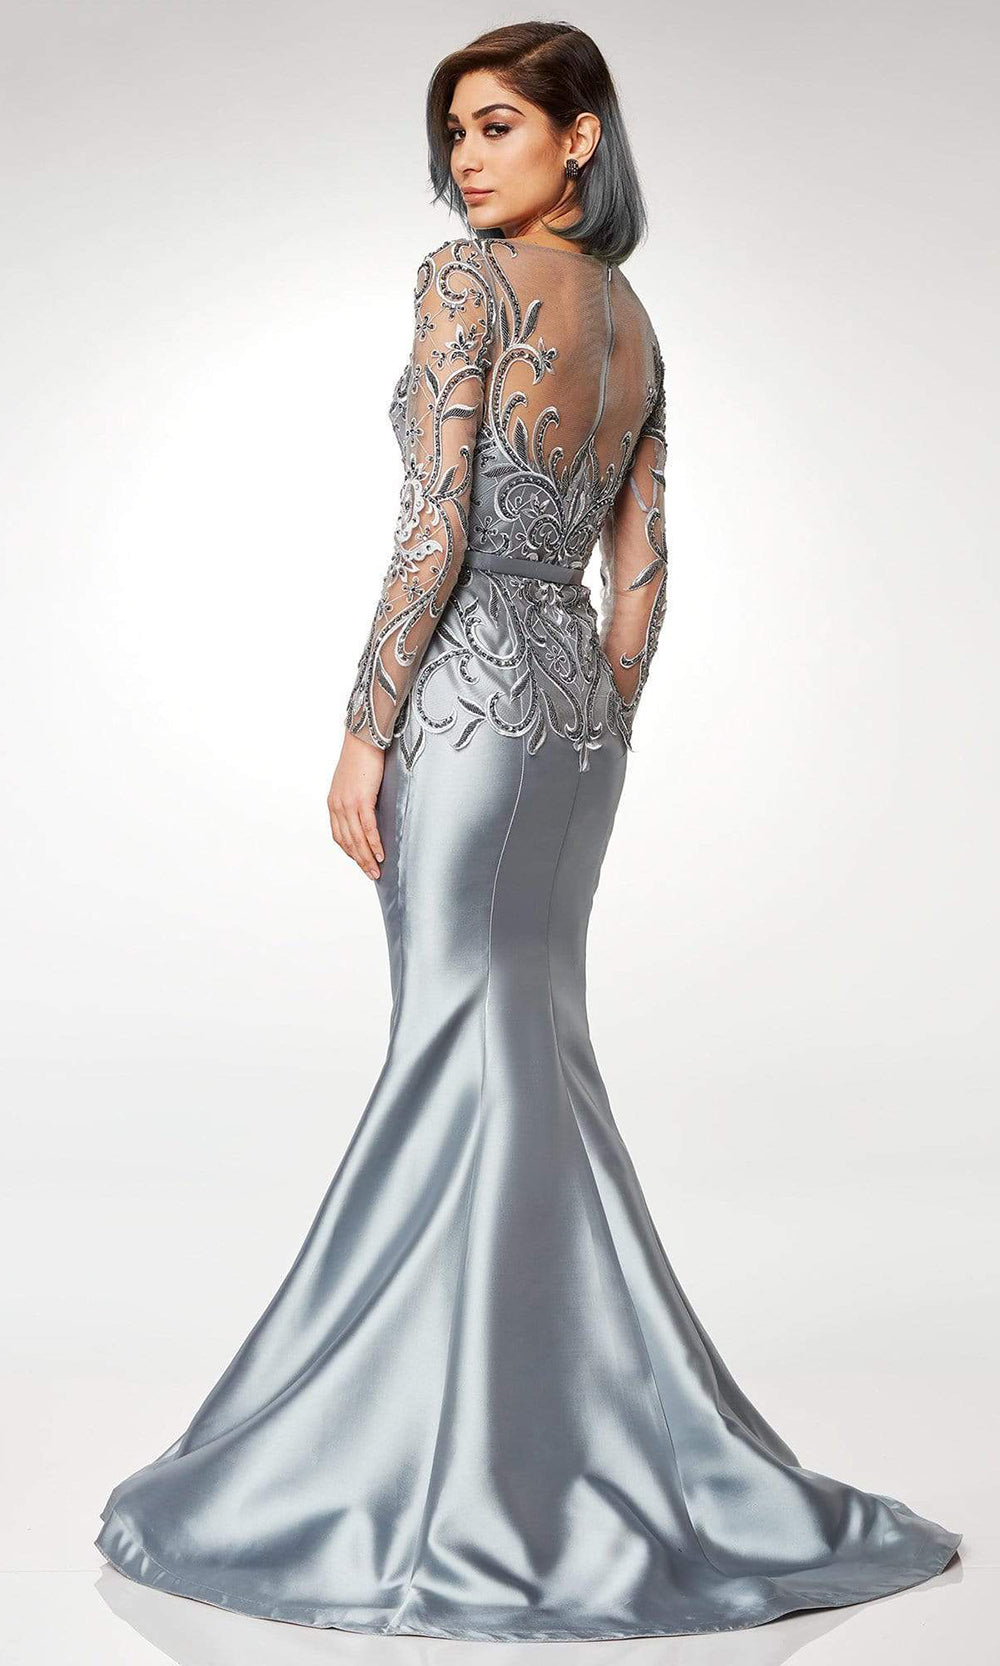 Clarisse - Scroll Motif Illusion Bateau Mermaid Gown M6523 - 1 pc Silver In Size 10 Available CCSALE 10 / Silver